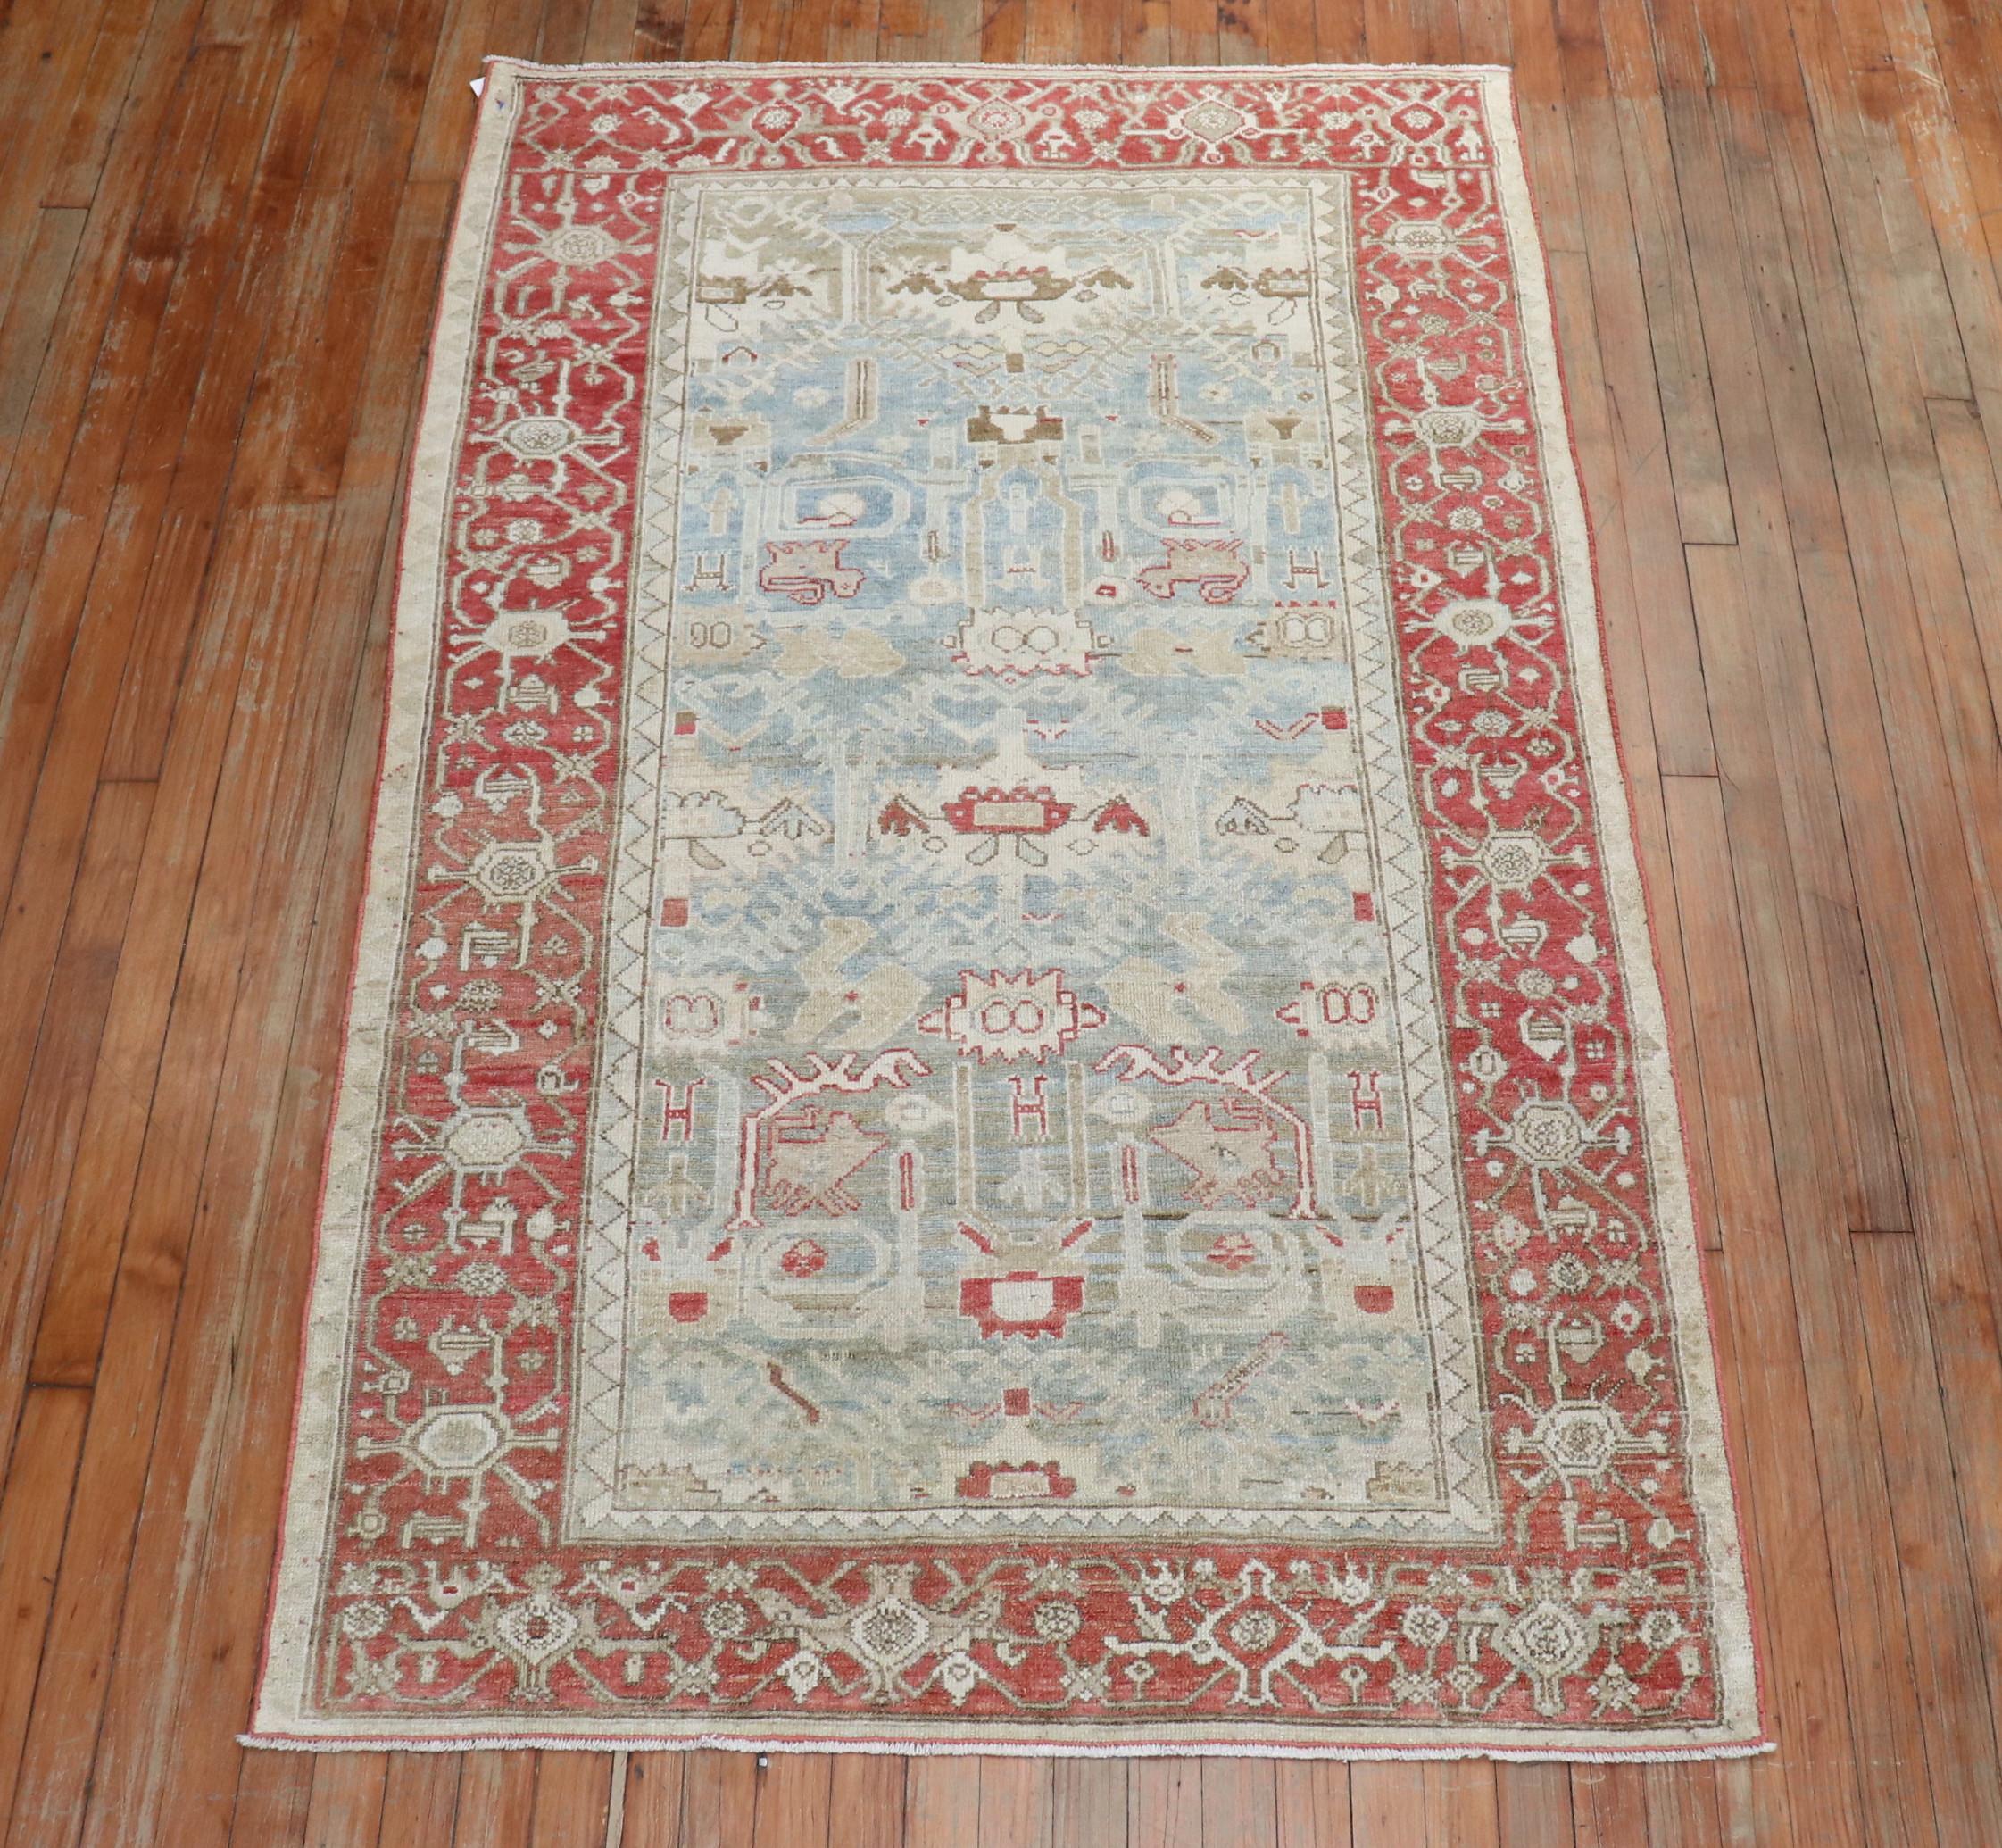 An accent size early 20th century Persian Malayer rug.

Measures: 4' x 6'10